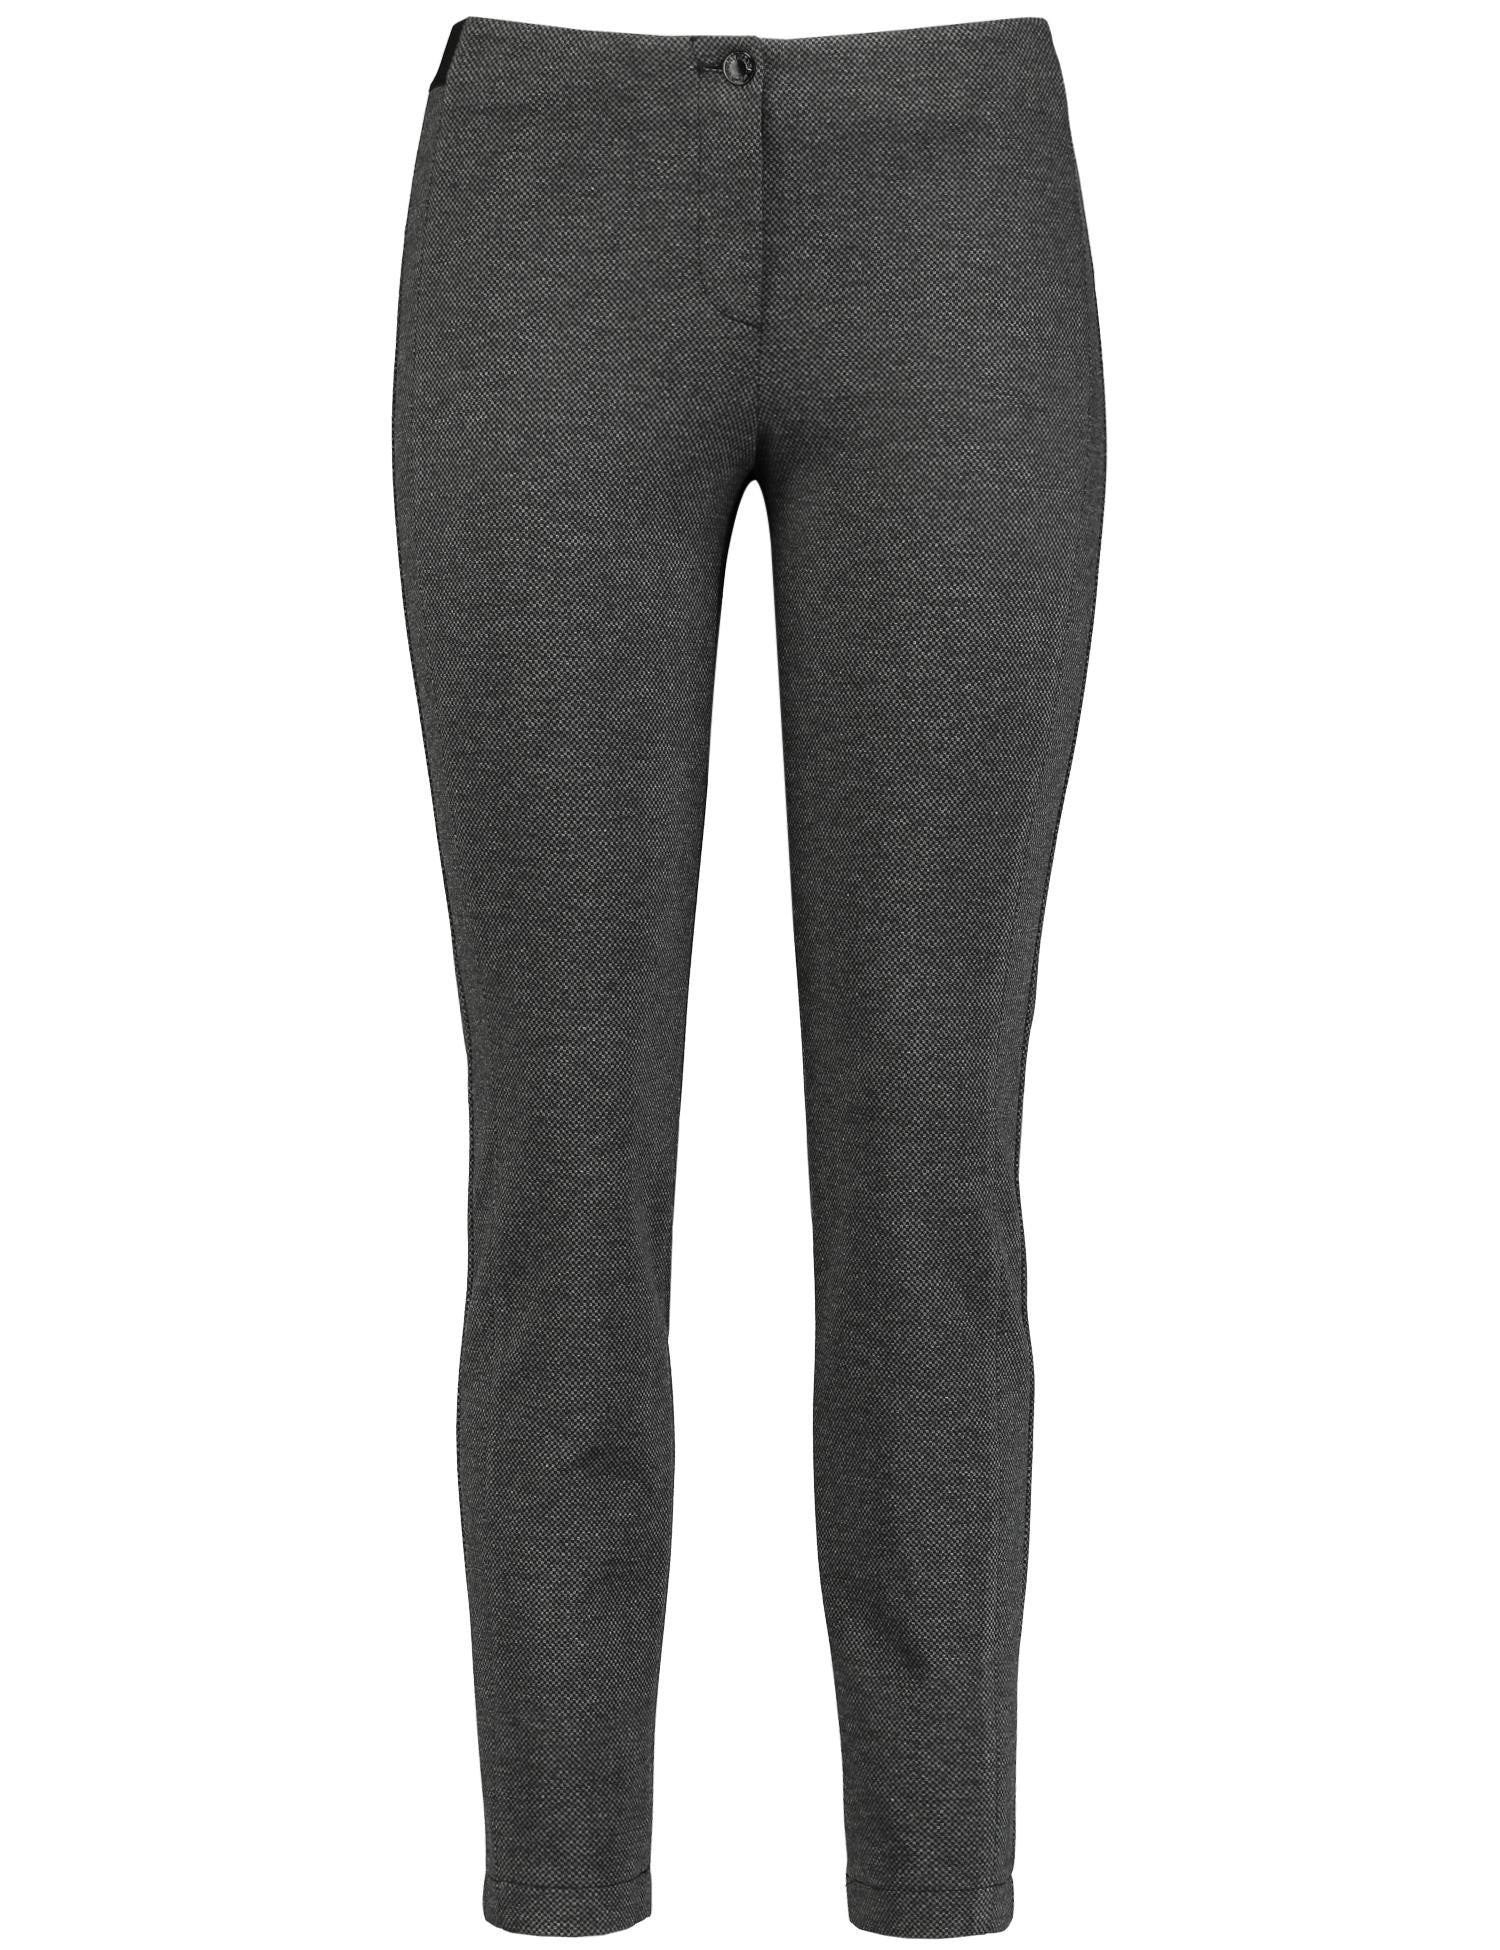 Two-Tone Texture Trousers by Gerry Weber at Jophiel